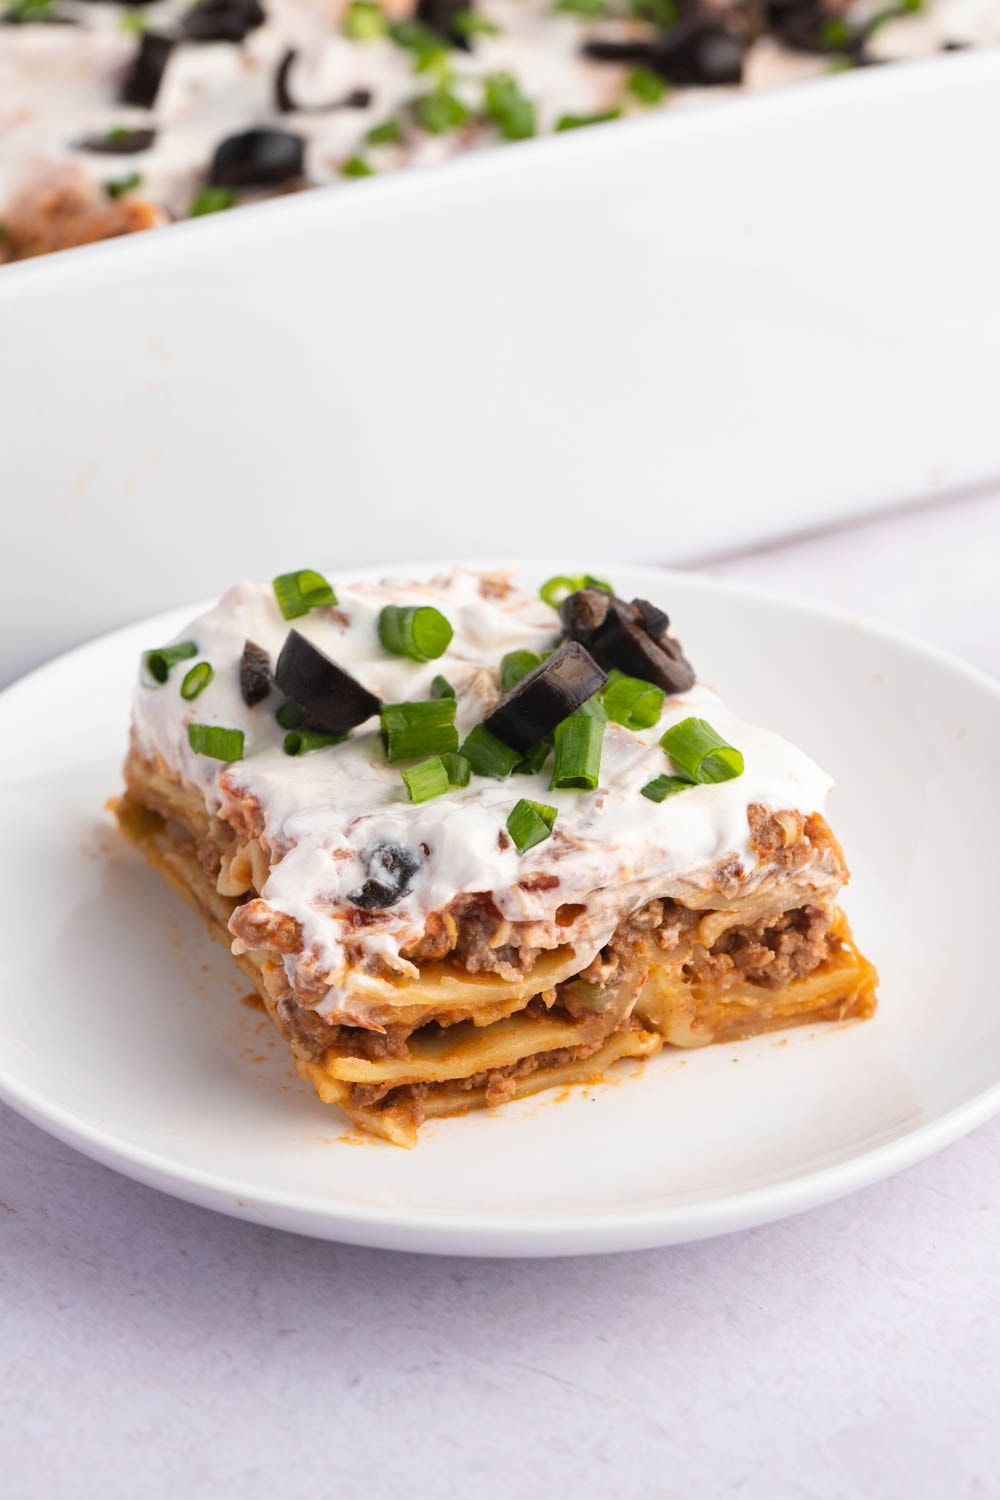 Slice of Mexican Lasagna with Ground Beef, Black Olives and Green Onions